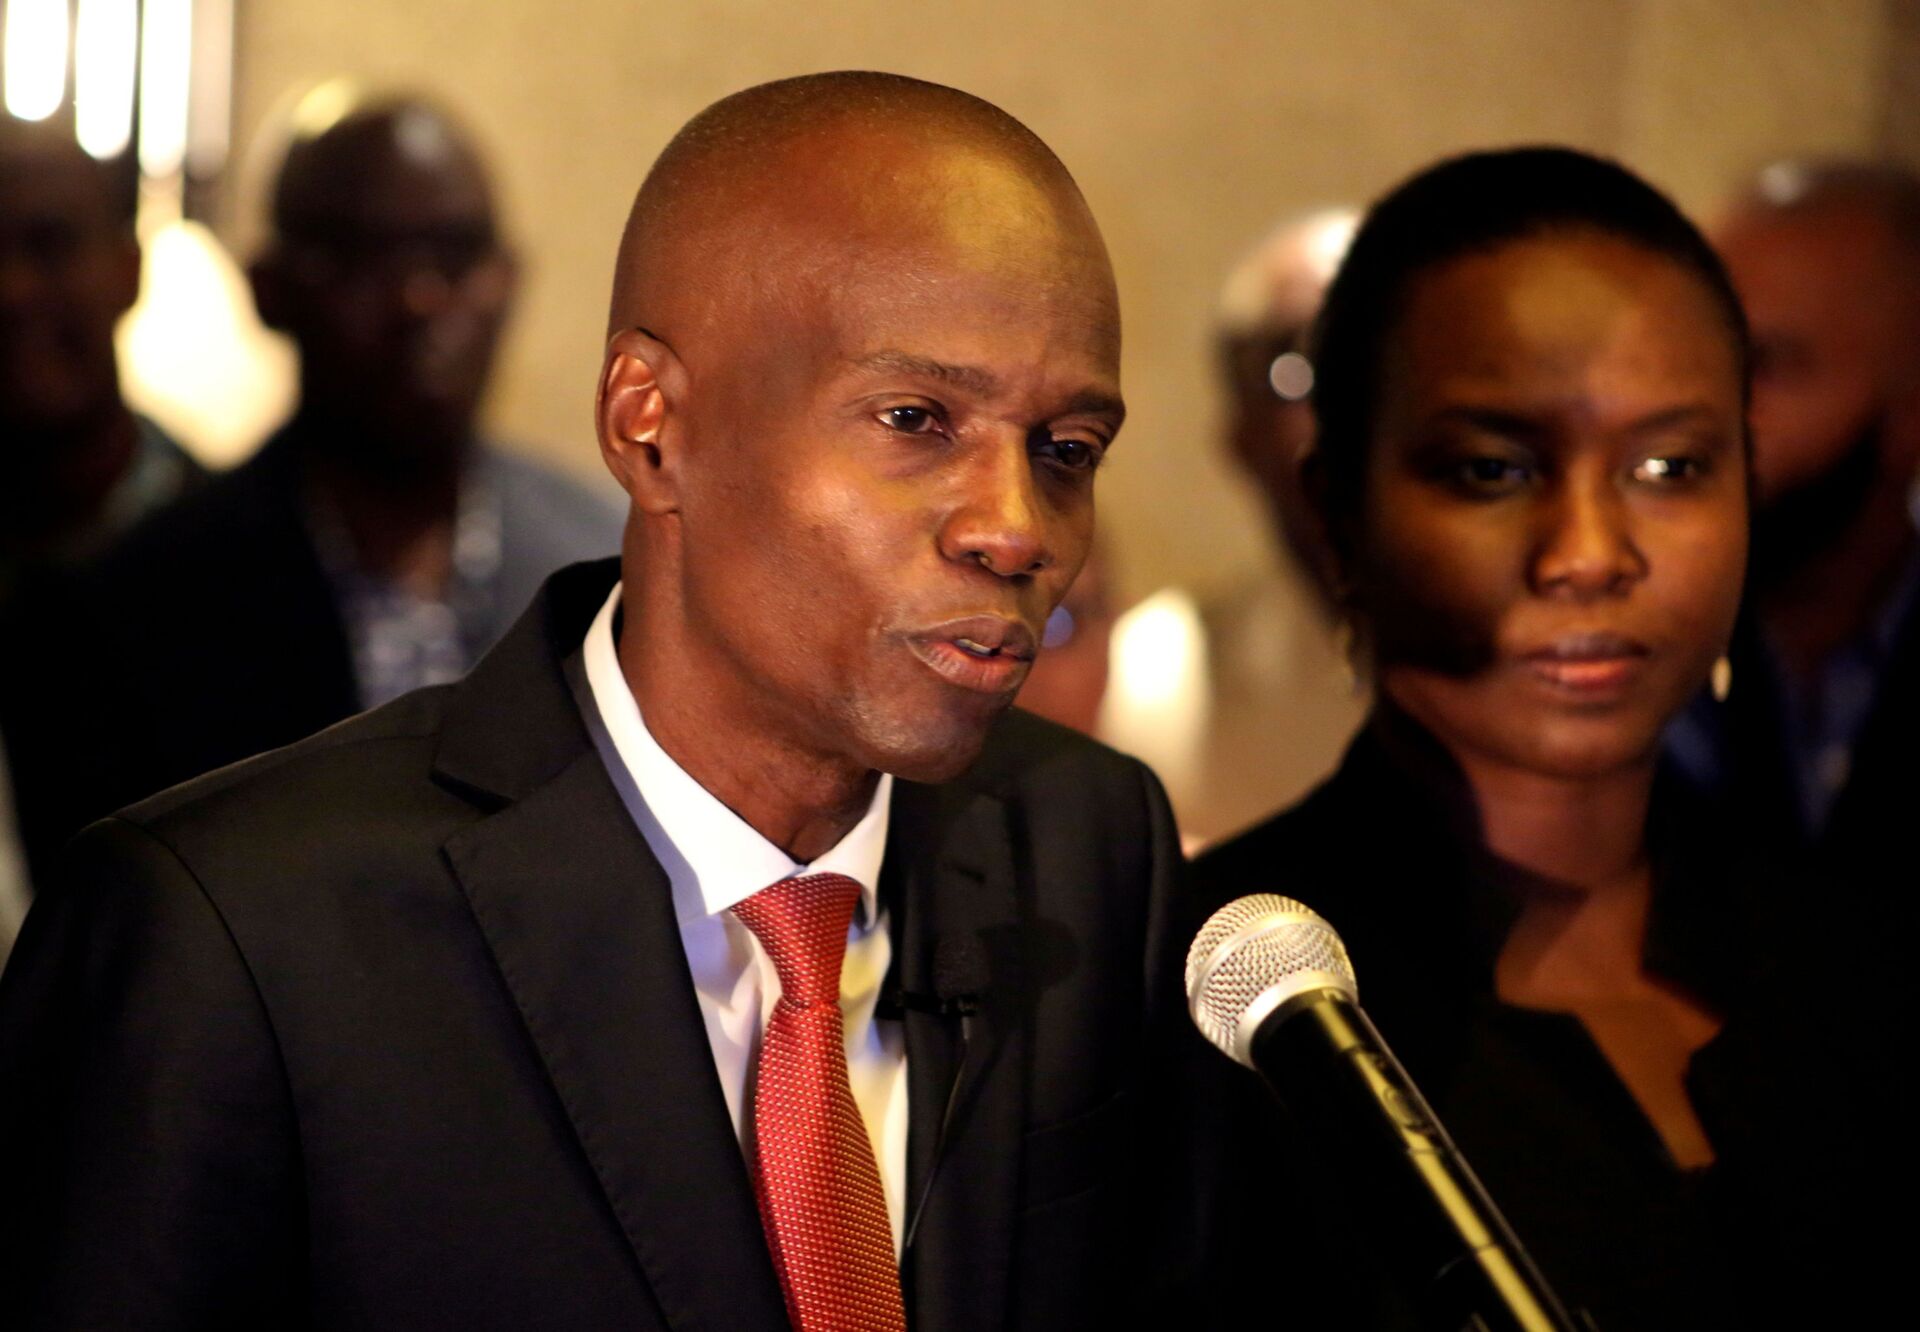 FILE PHOTO: Jovenel Moise addresses the media next to his wife Martine after winning the 2016 presidential election, in Port-au-Prince, Haiti. Picture taken November 28, 2016 - Sputnik International, 1920, 07.09.2021